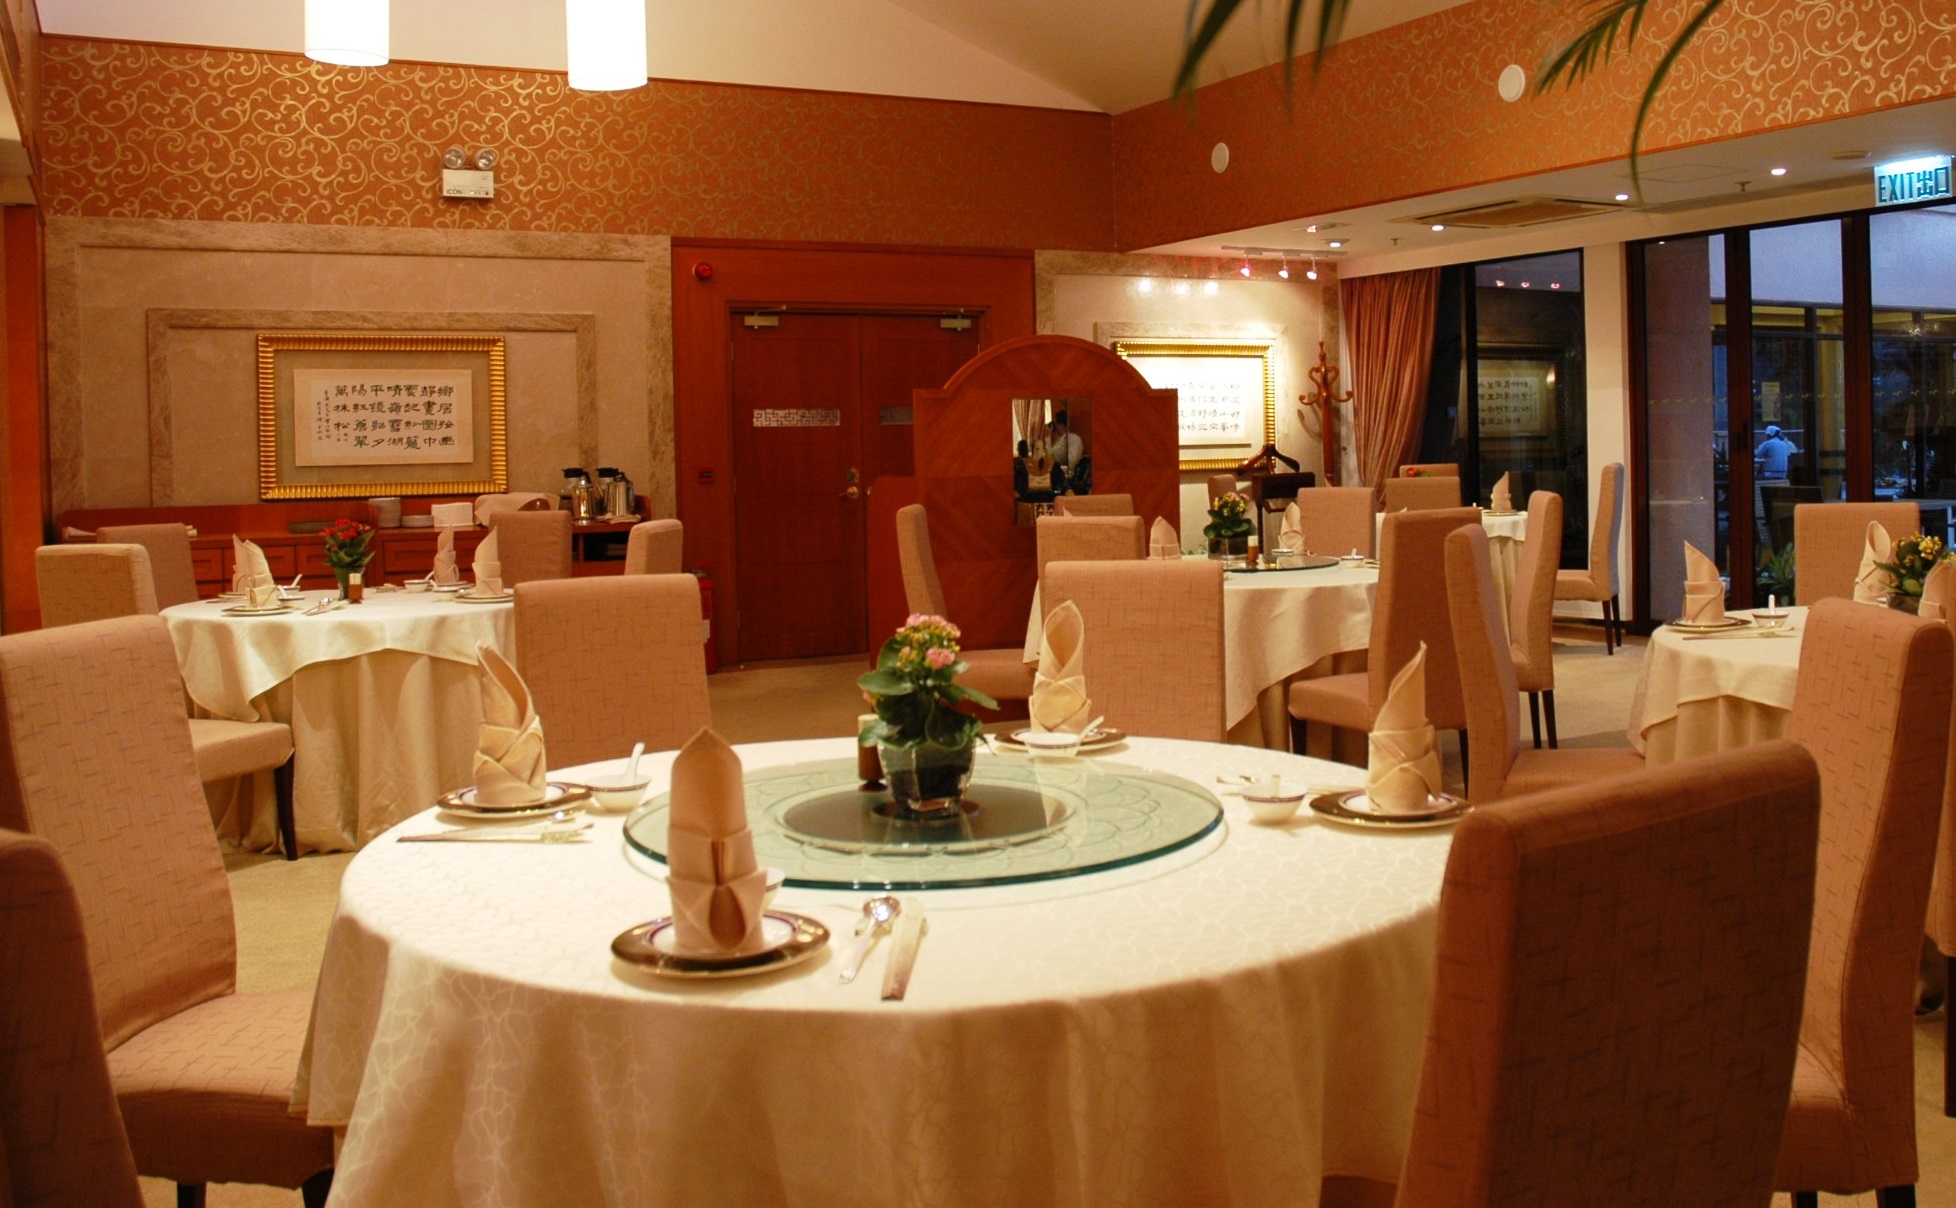 Discovery Bay Golf Club  - Cham Heen (Chinese Restaurant)